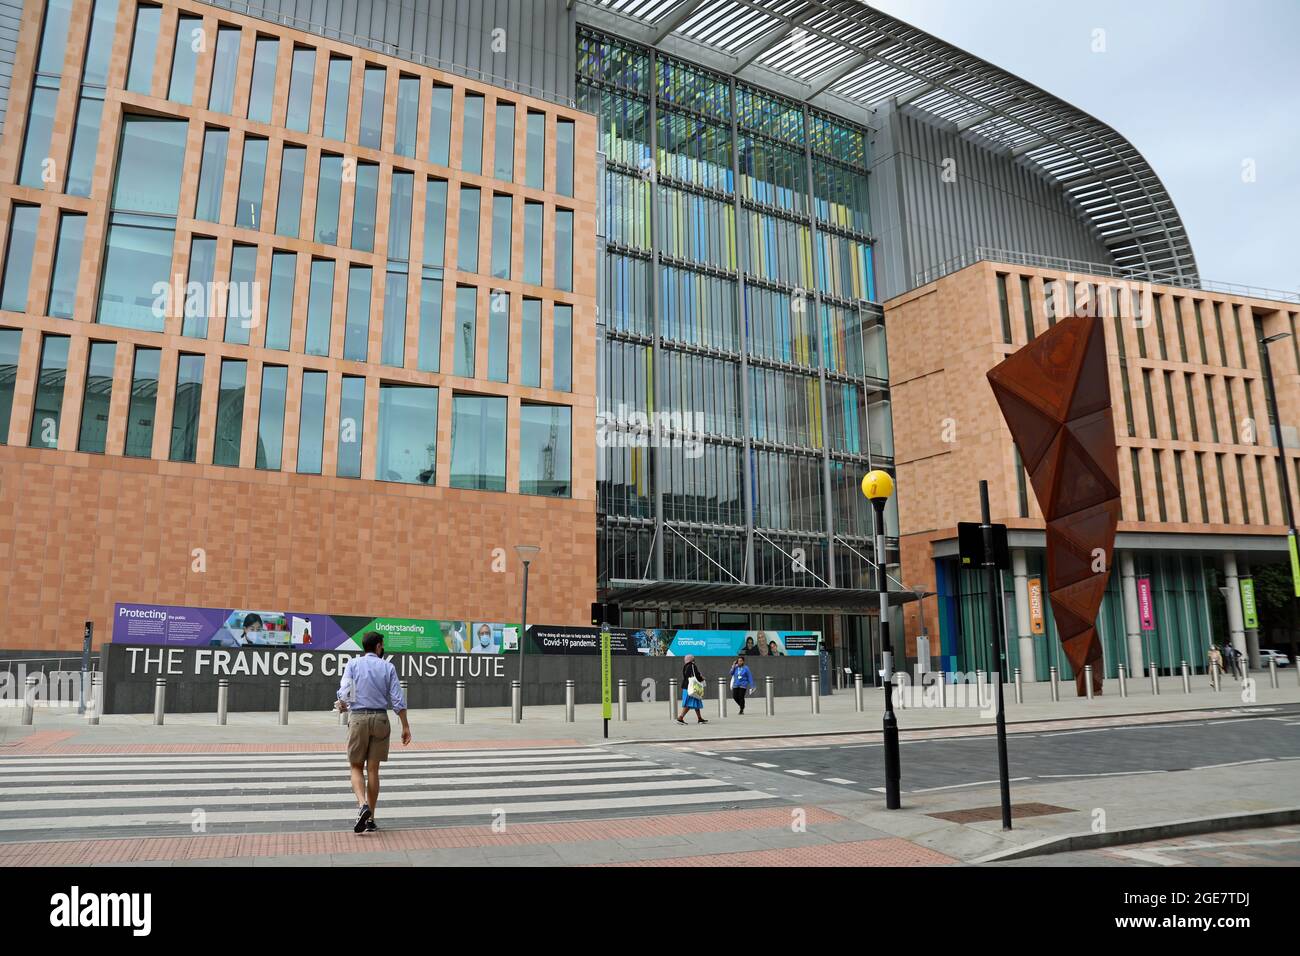 The Francis Crick Institute at Camden in North London Stock Photo